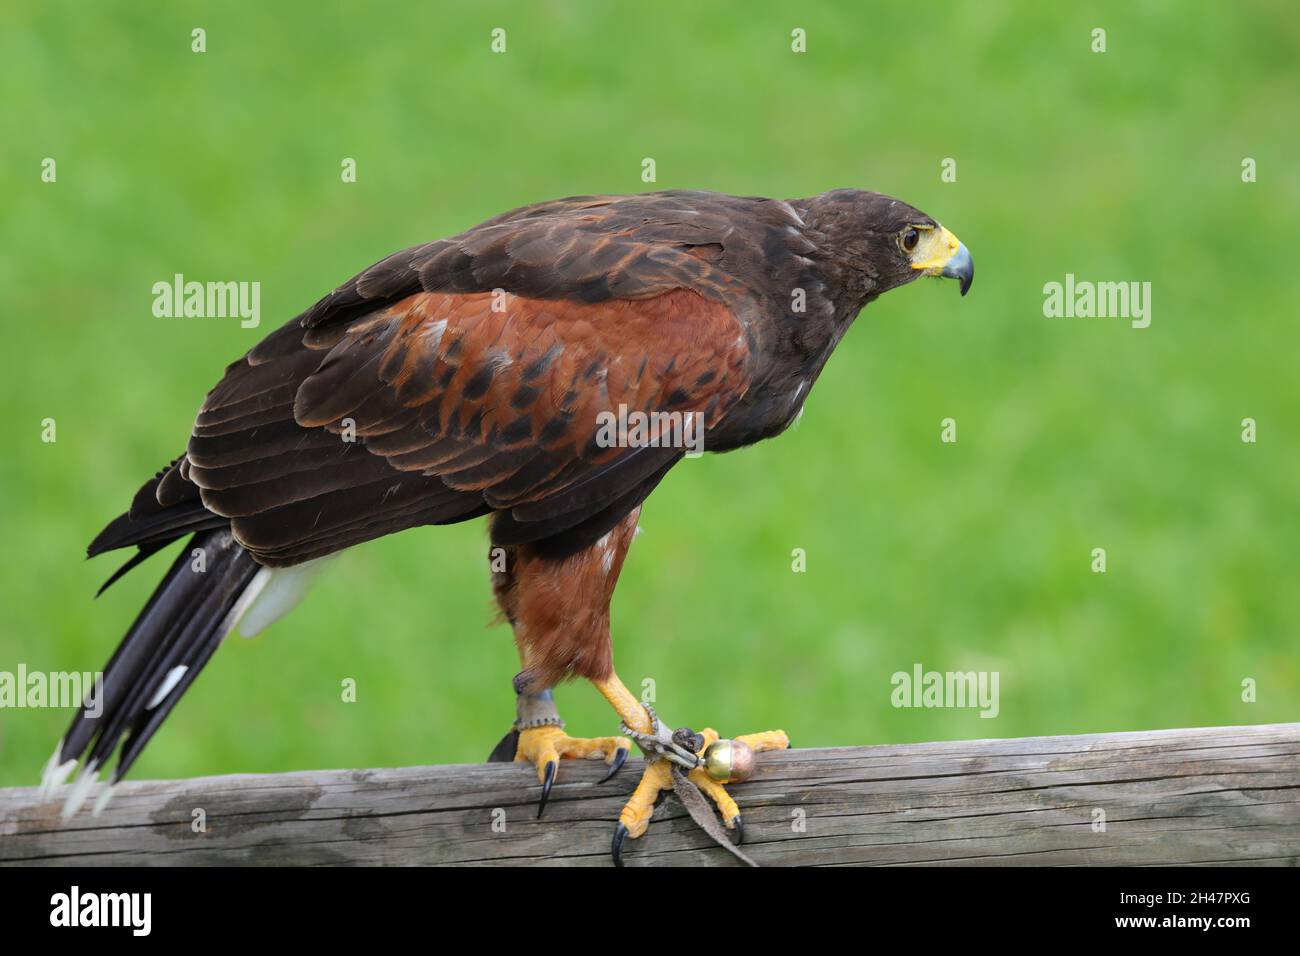 harris buzzard is a bird of prey with brown plumage perched on a branch Stock Photo